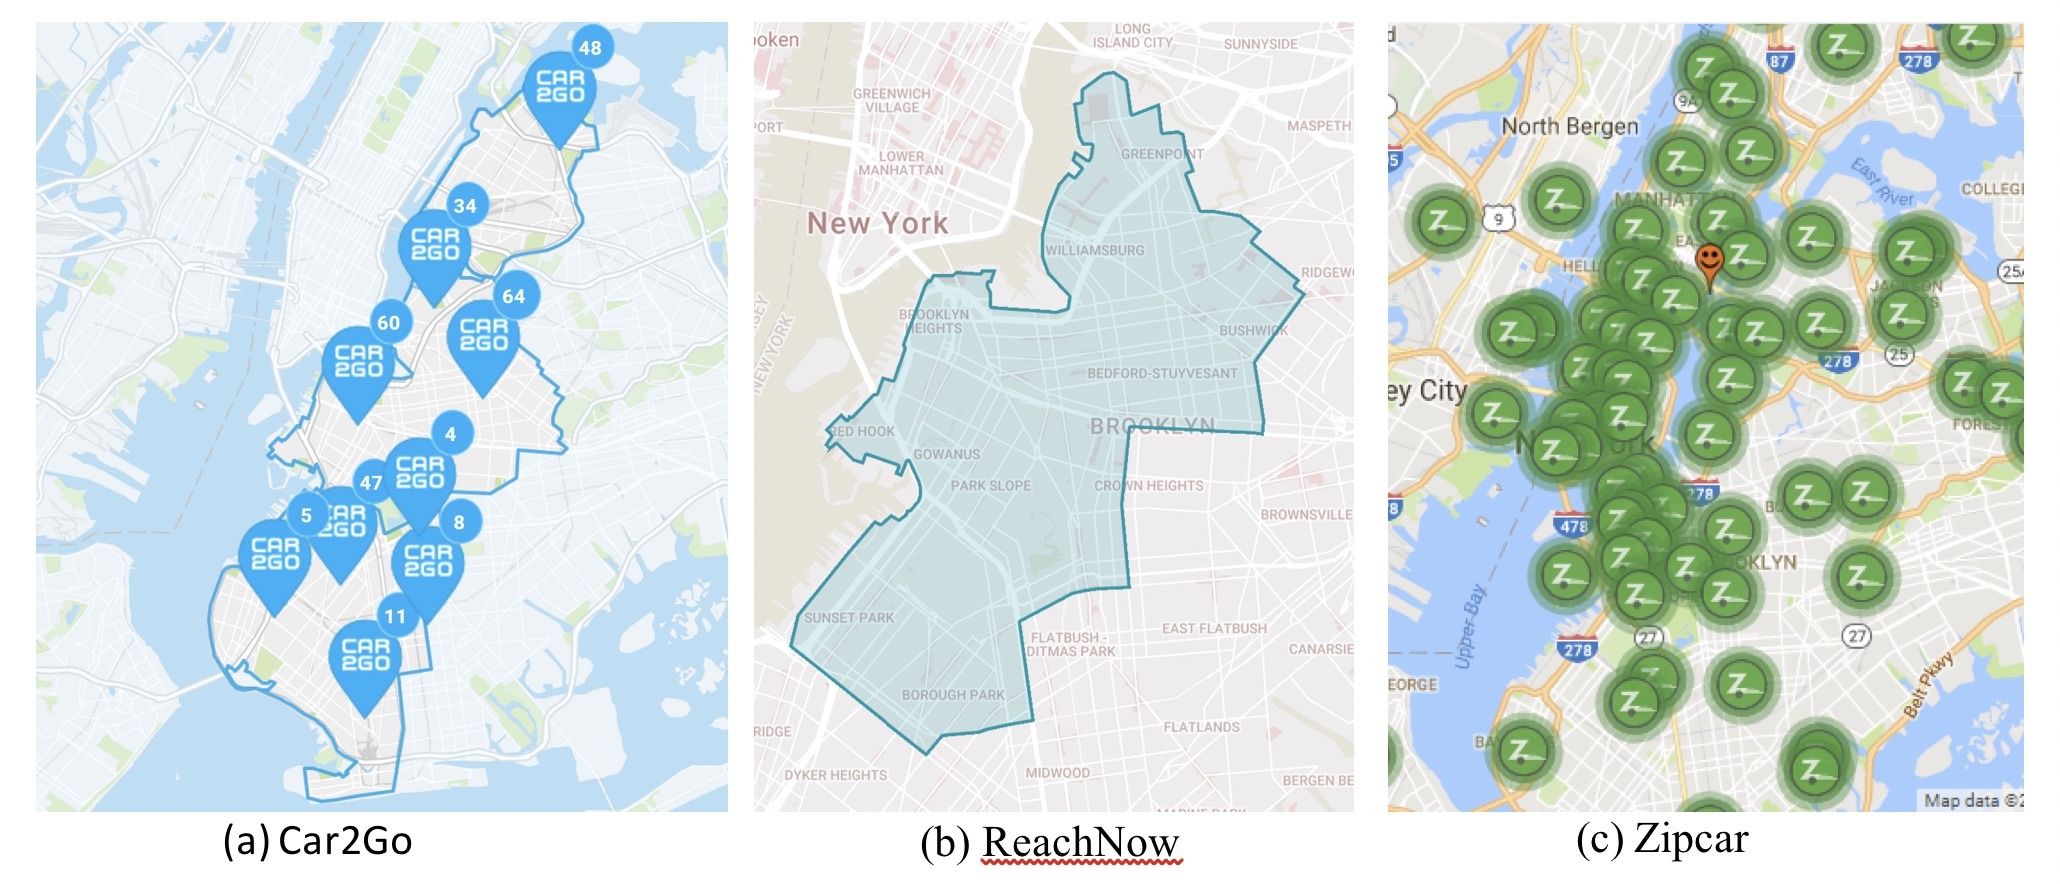 Carsharing coverage areas in NYC